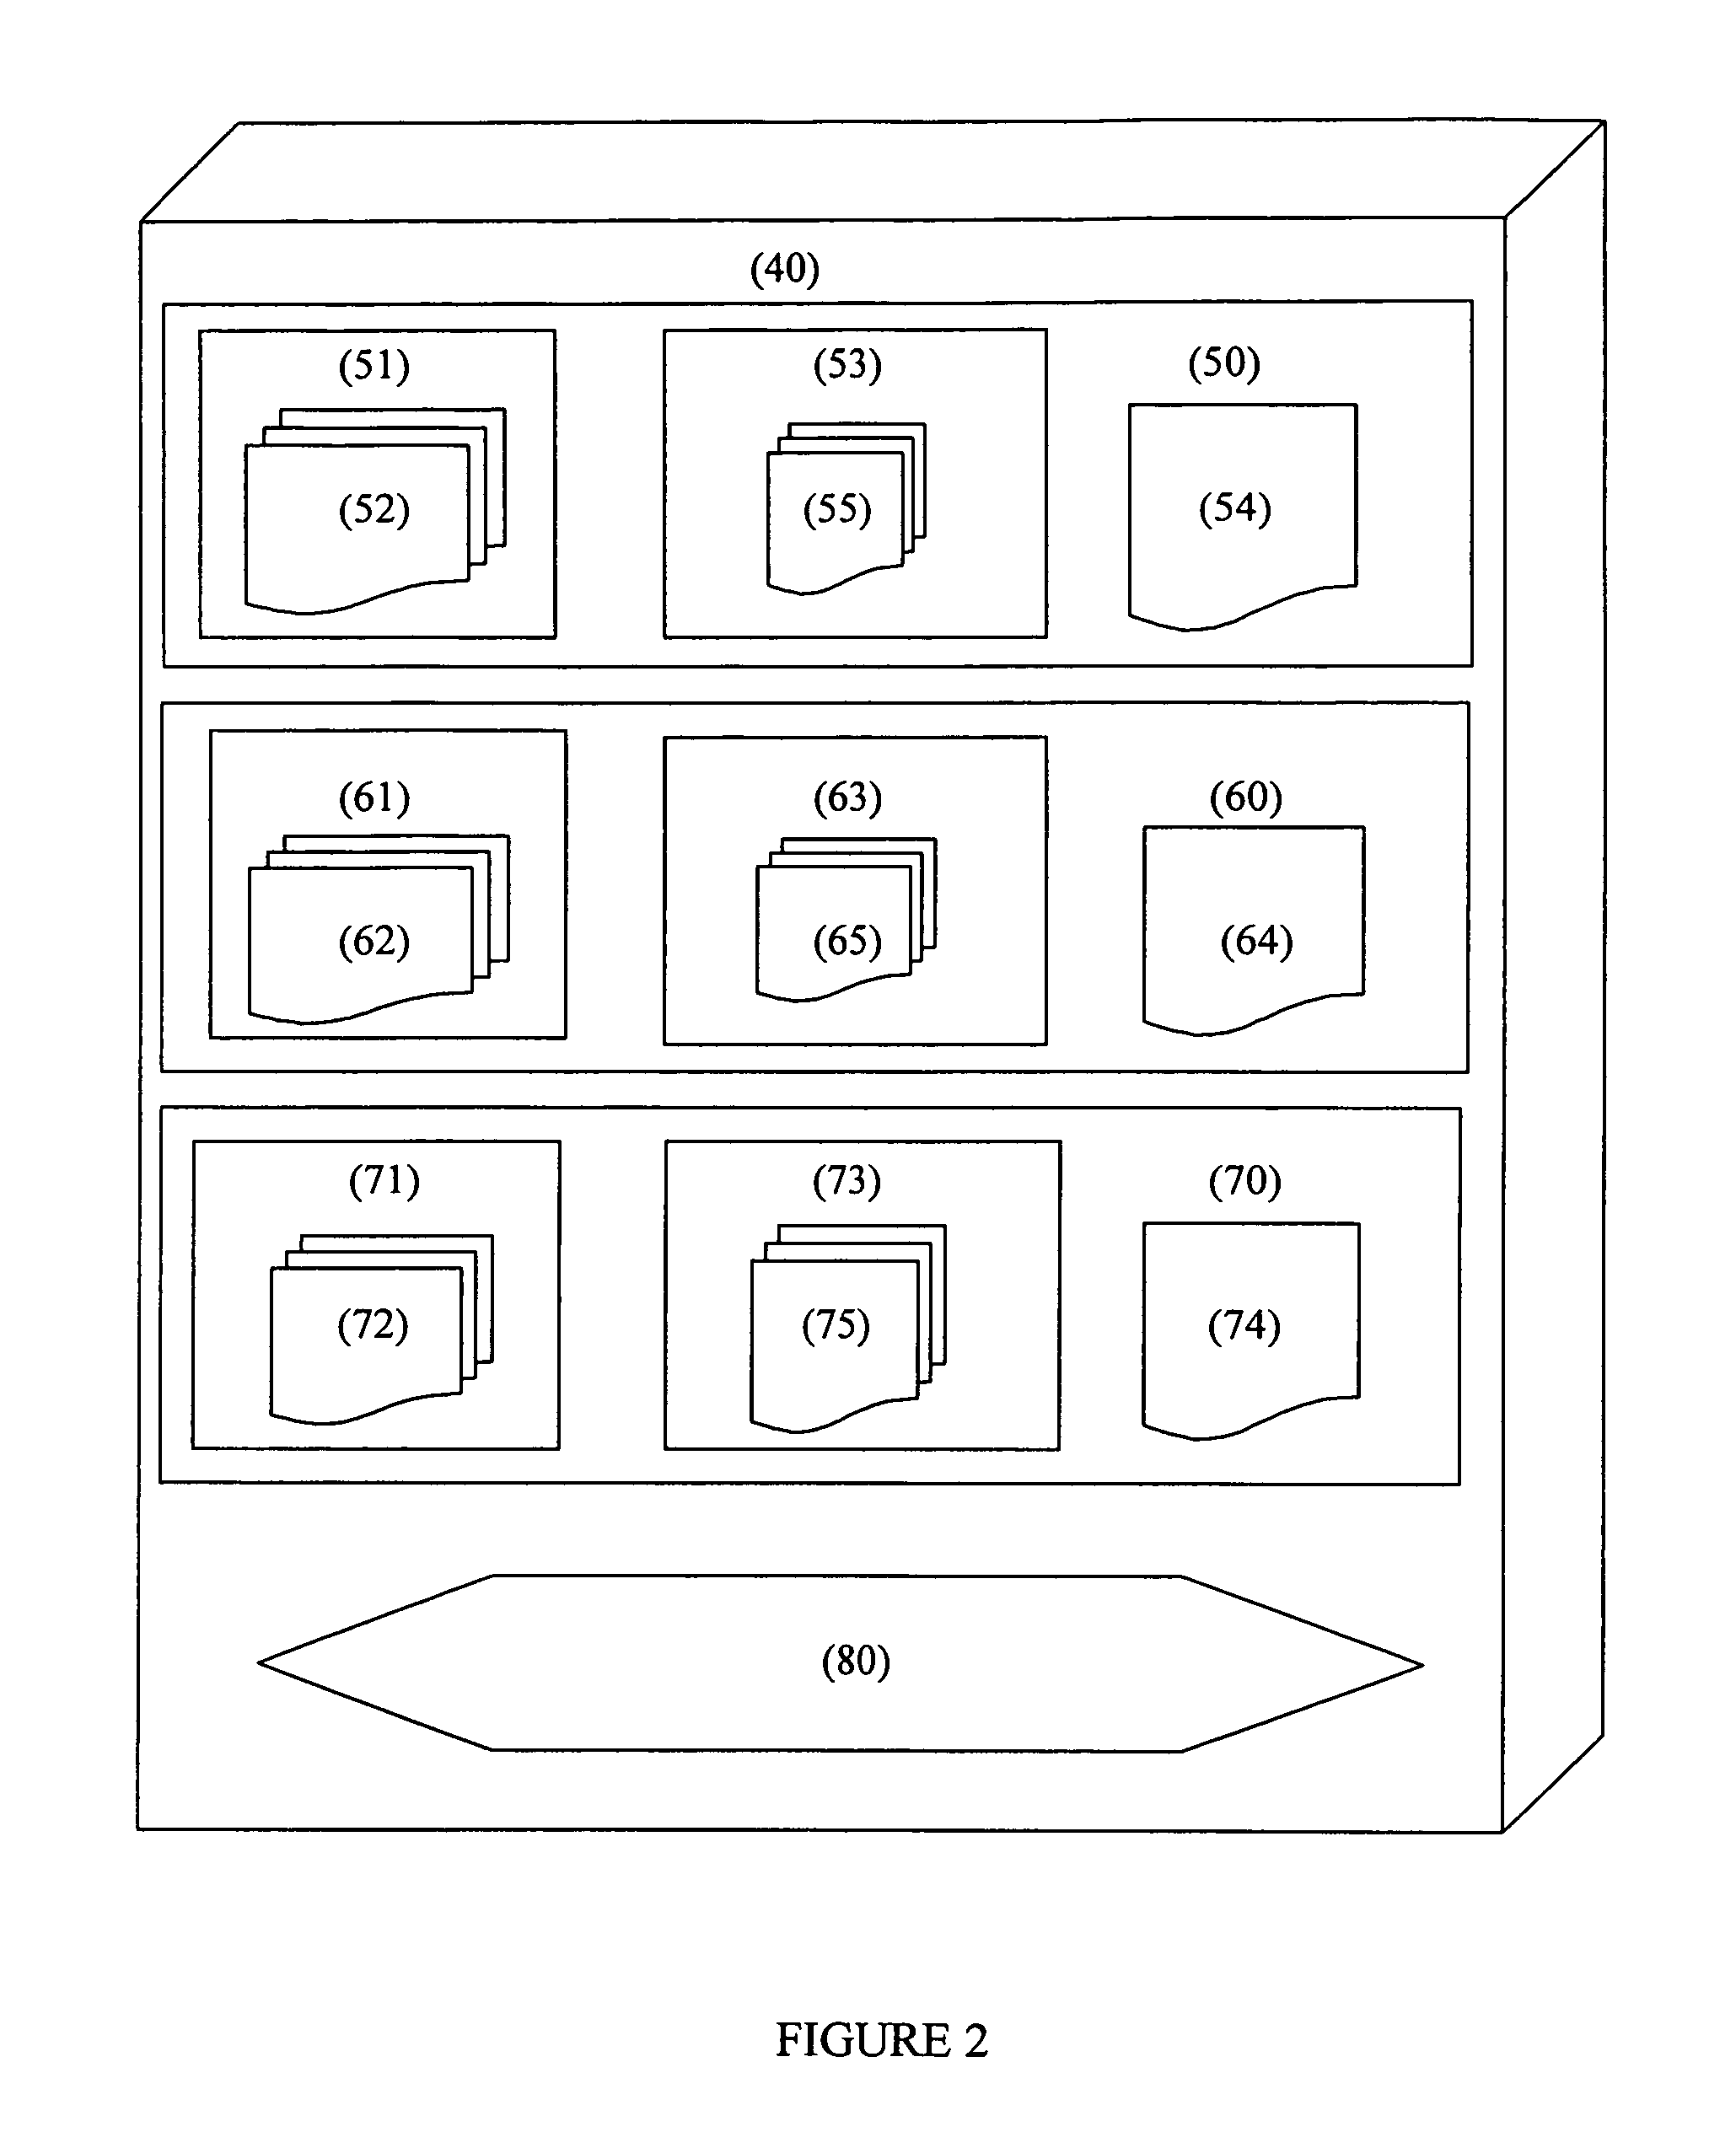 System and method for interactive coordination of scheduling, calendaring, and marketing